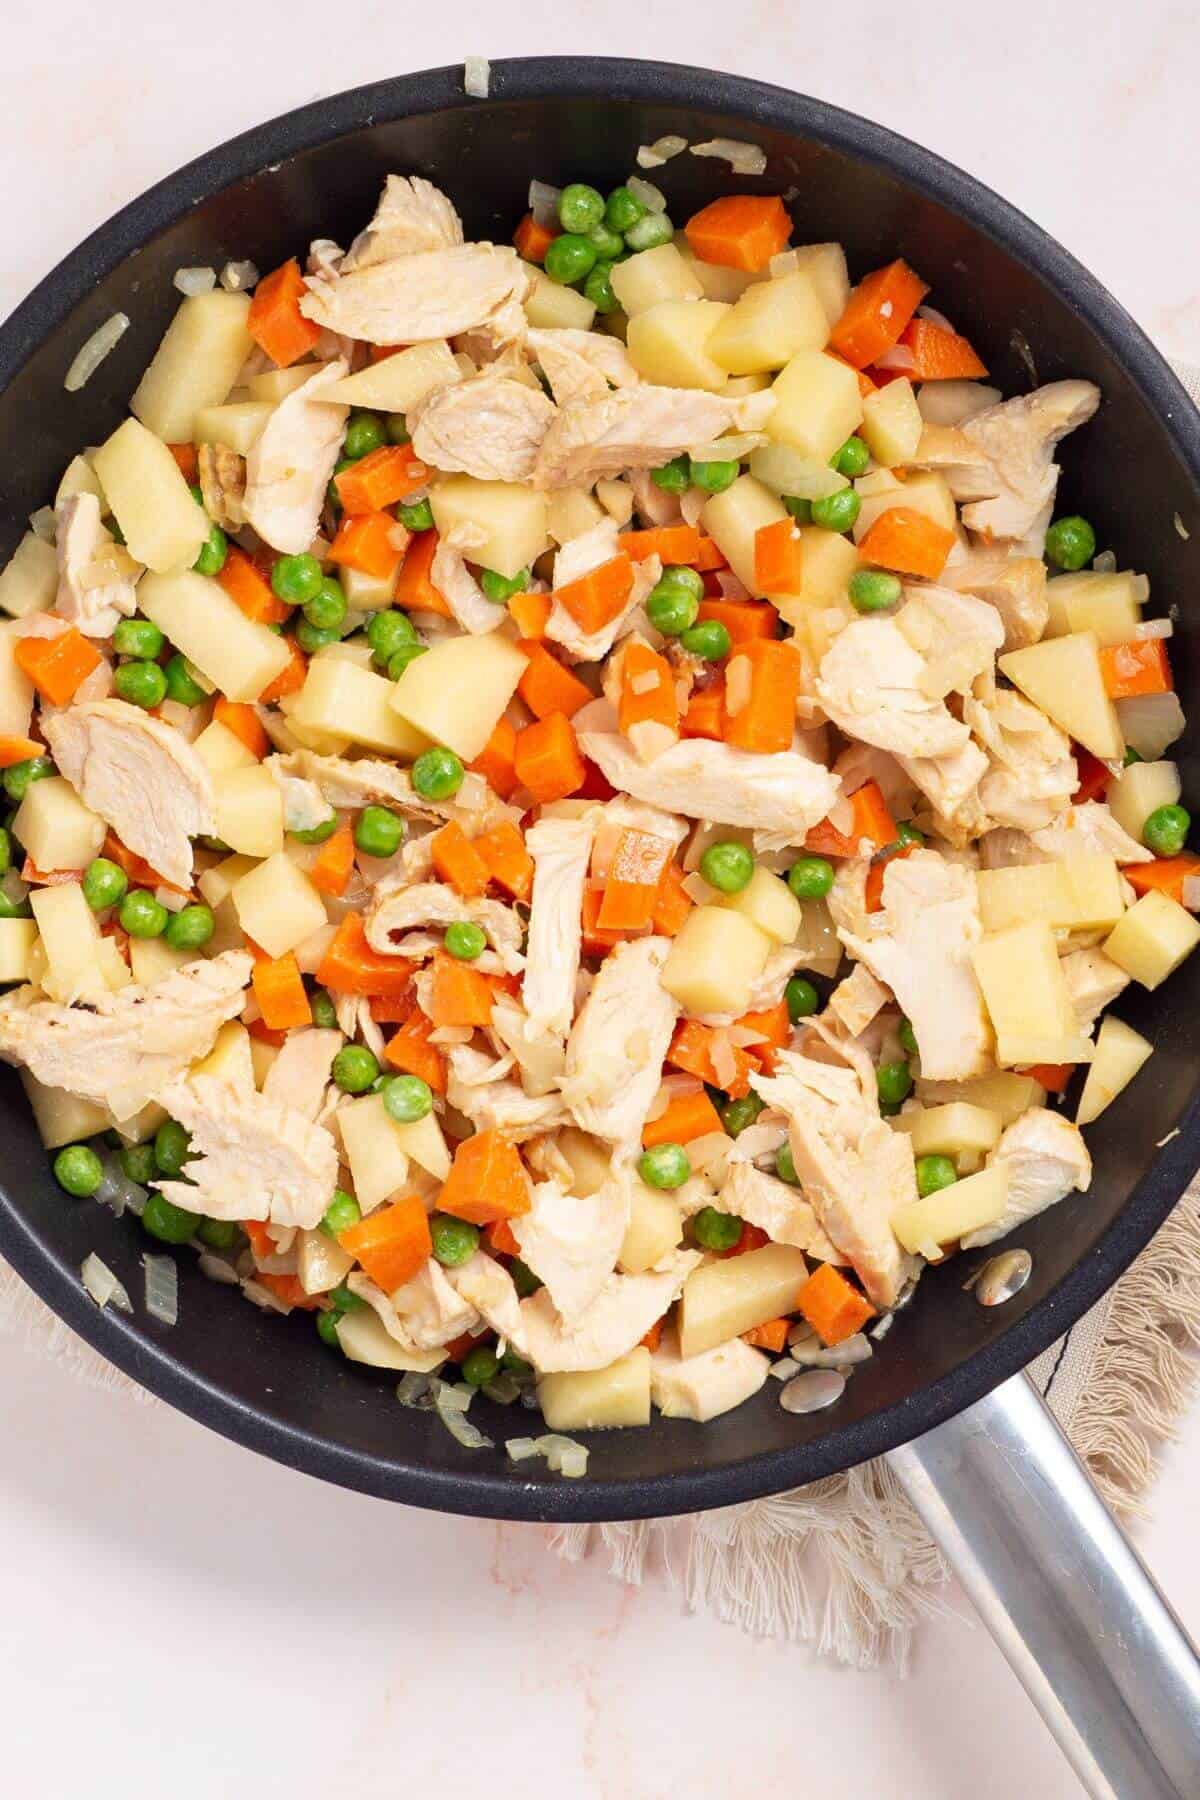 Vegetables and chicken combined in skillet.